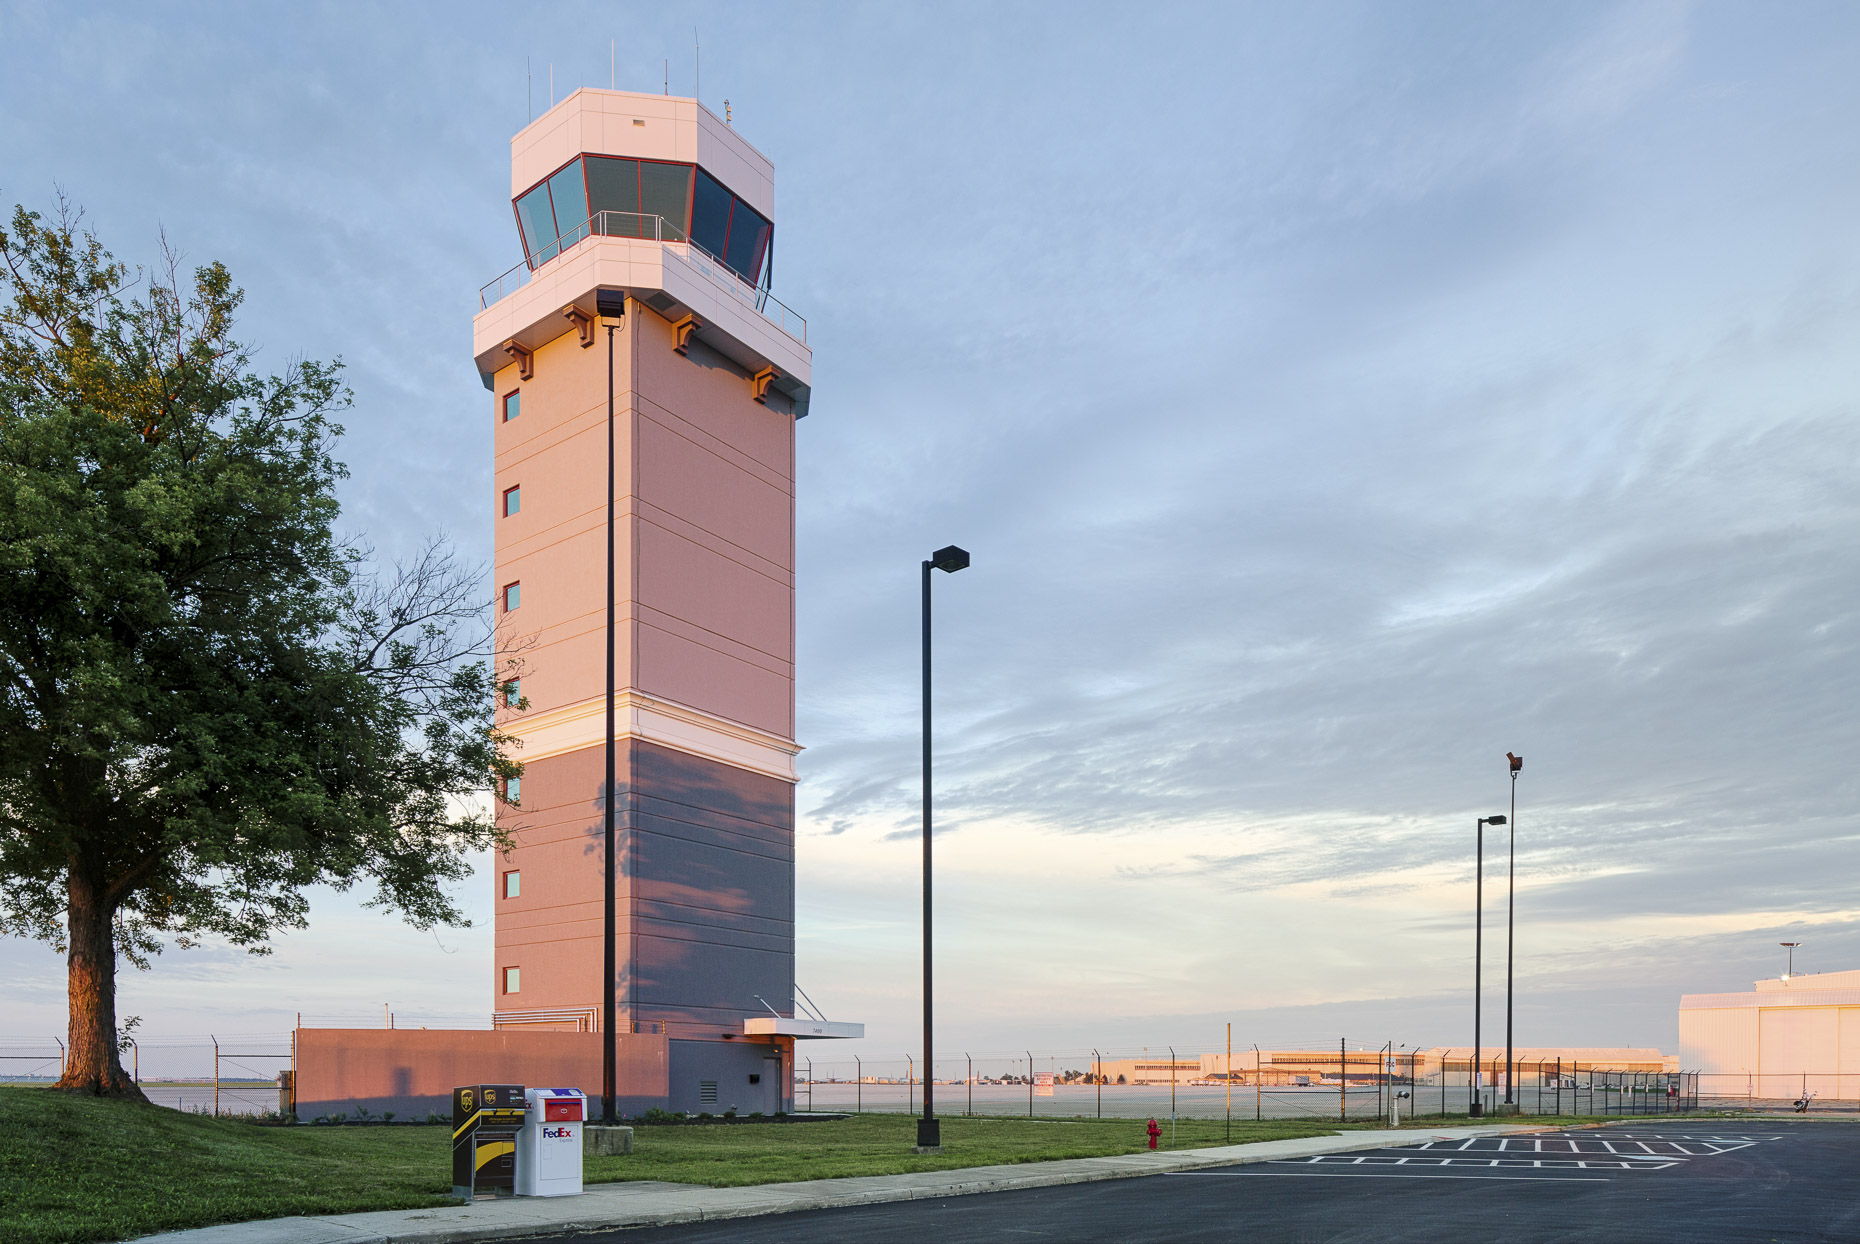 Rickenbacker International Airport ATC Tower by Smoot Construction photographed by Lauren K Davis based in Columbus, Ohio